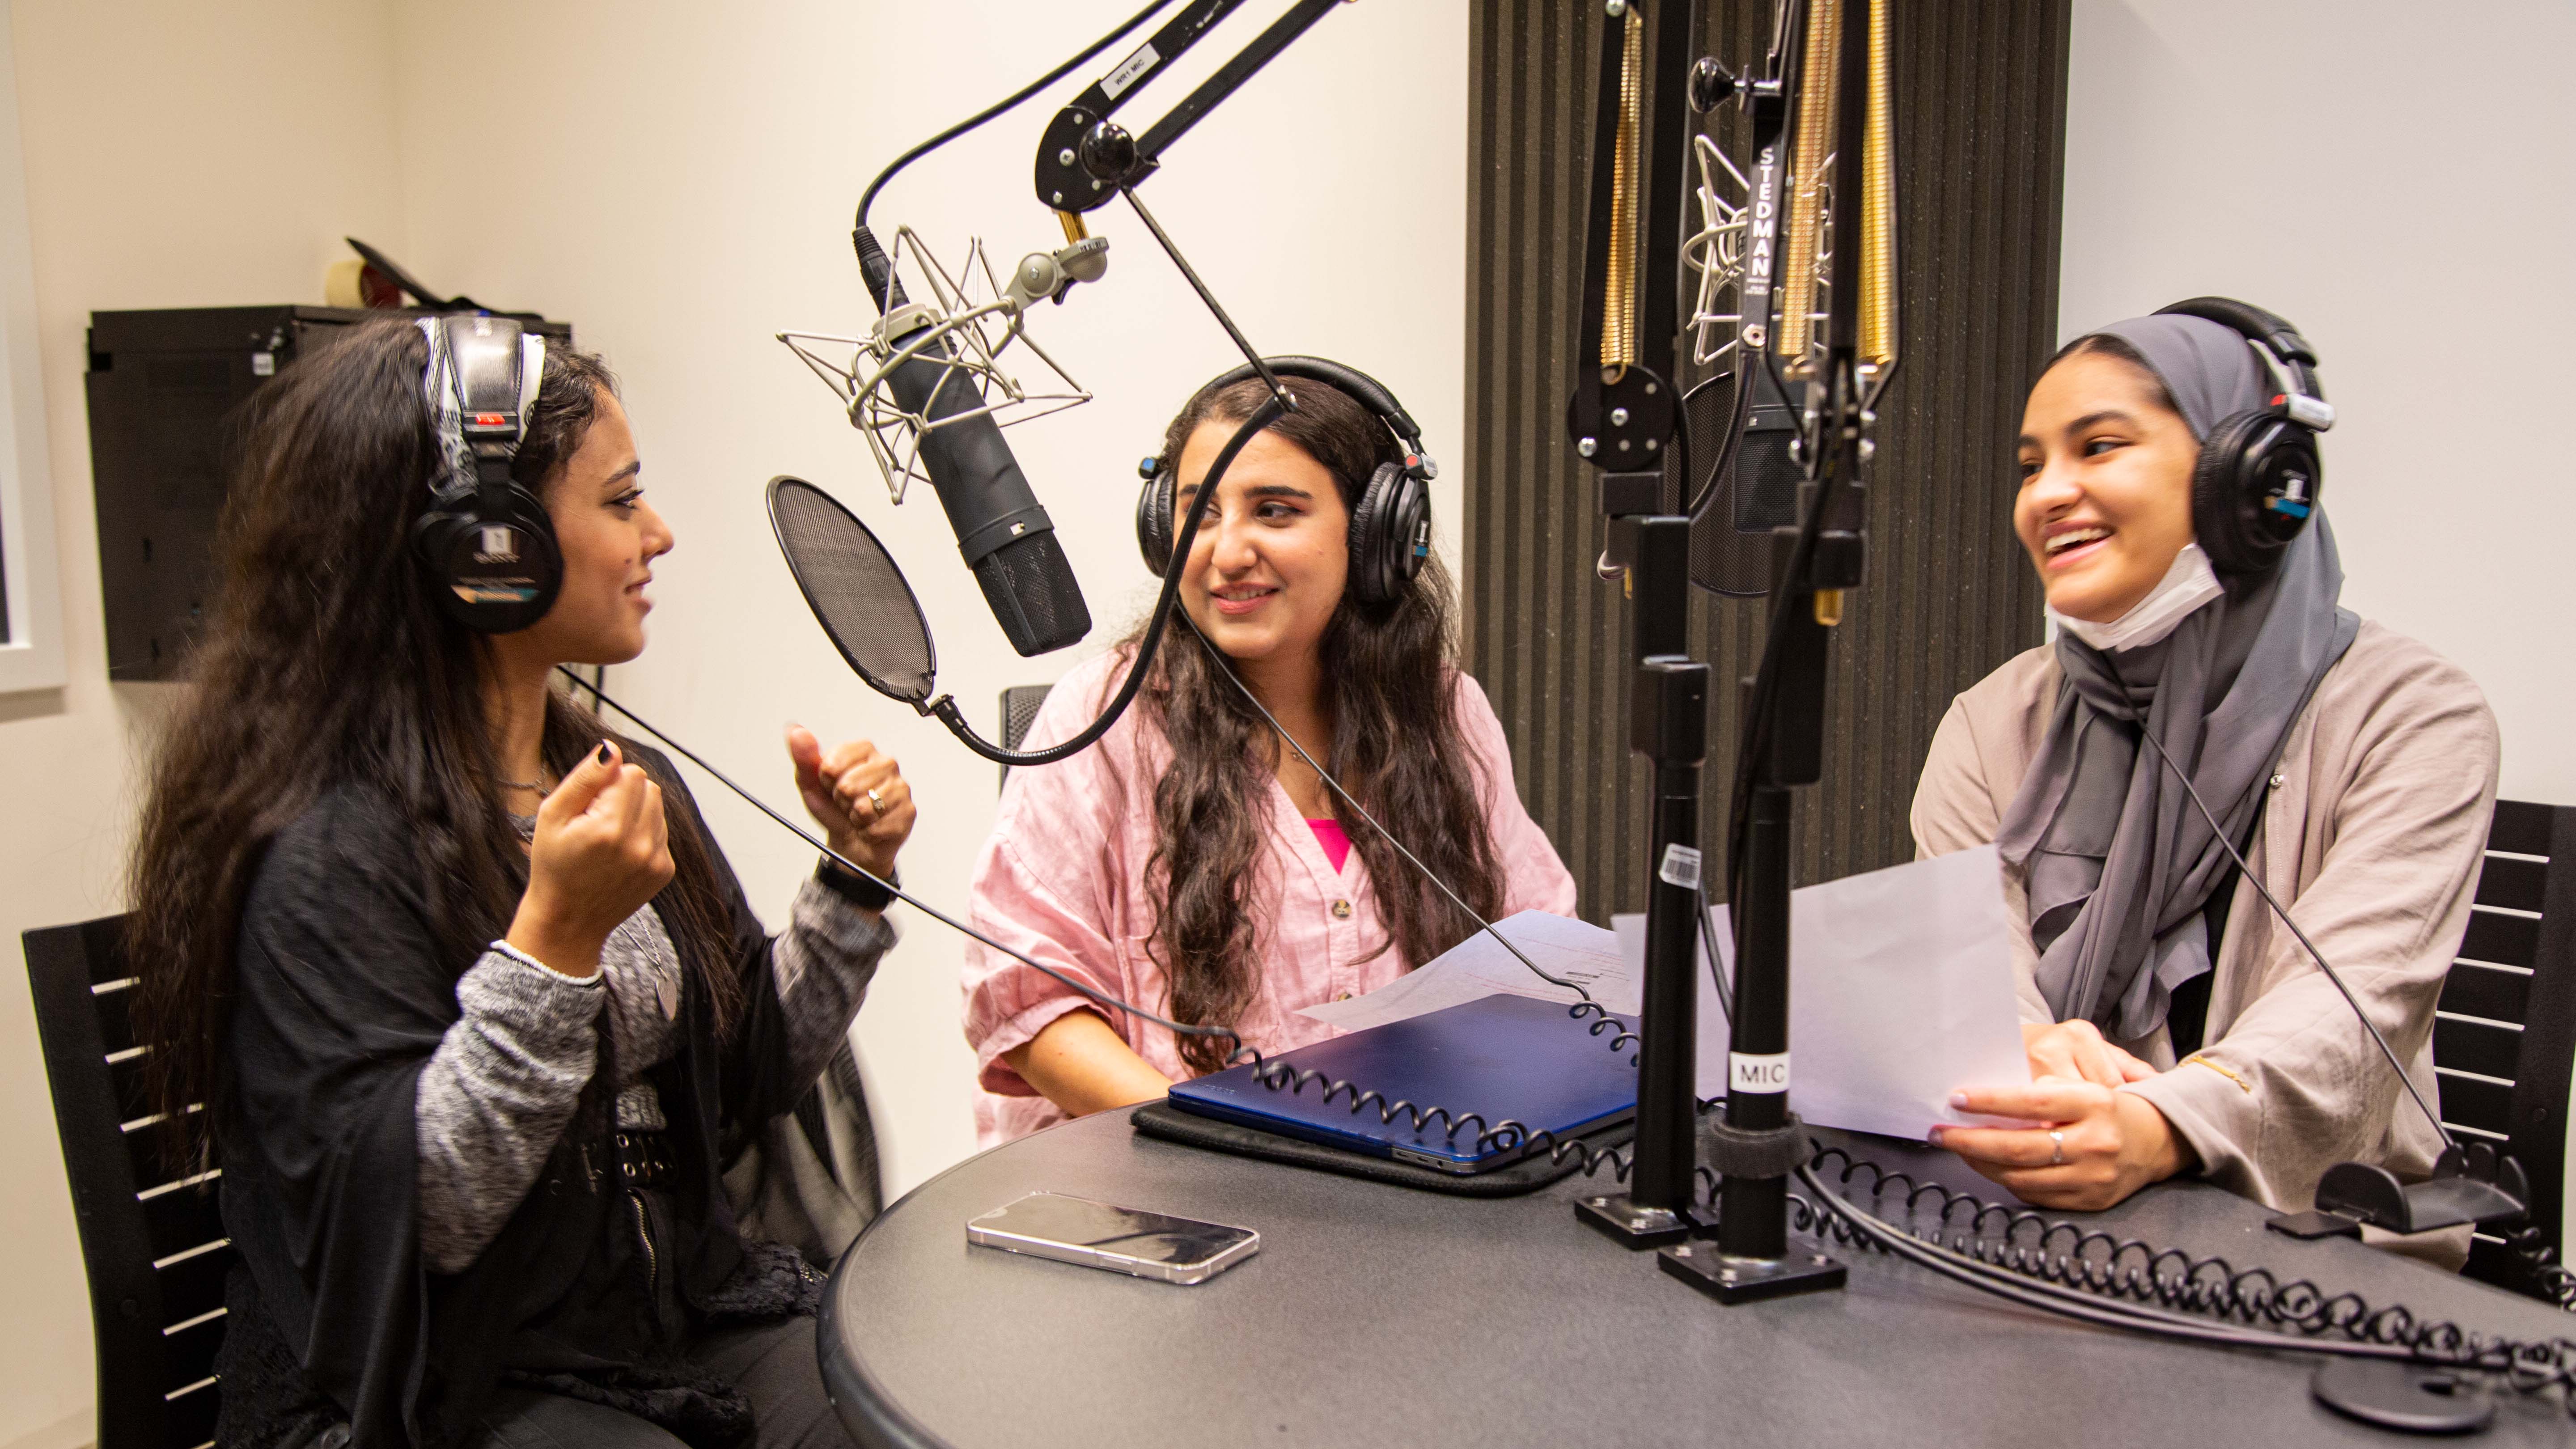 Students are involved in all aspects and stages of podcast production, from recording to editing, publishing, and promoting. 